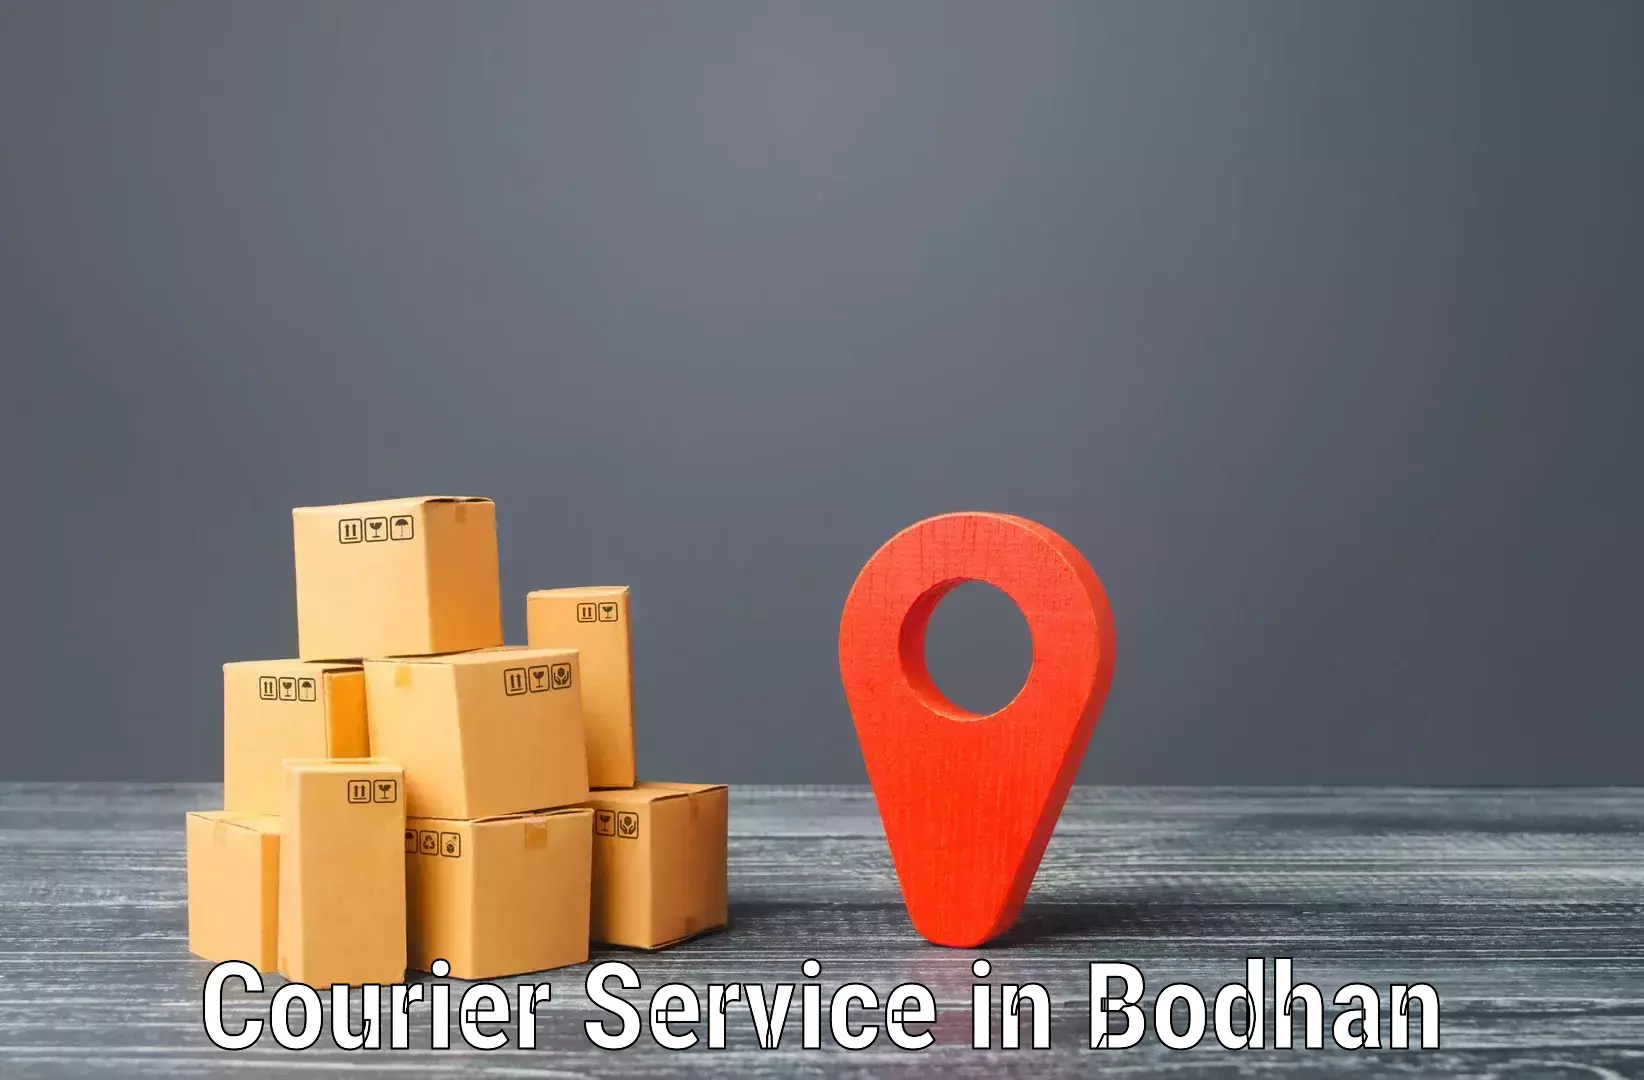 Multi-national courier services in Bodhan